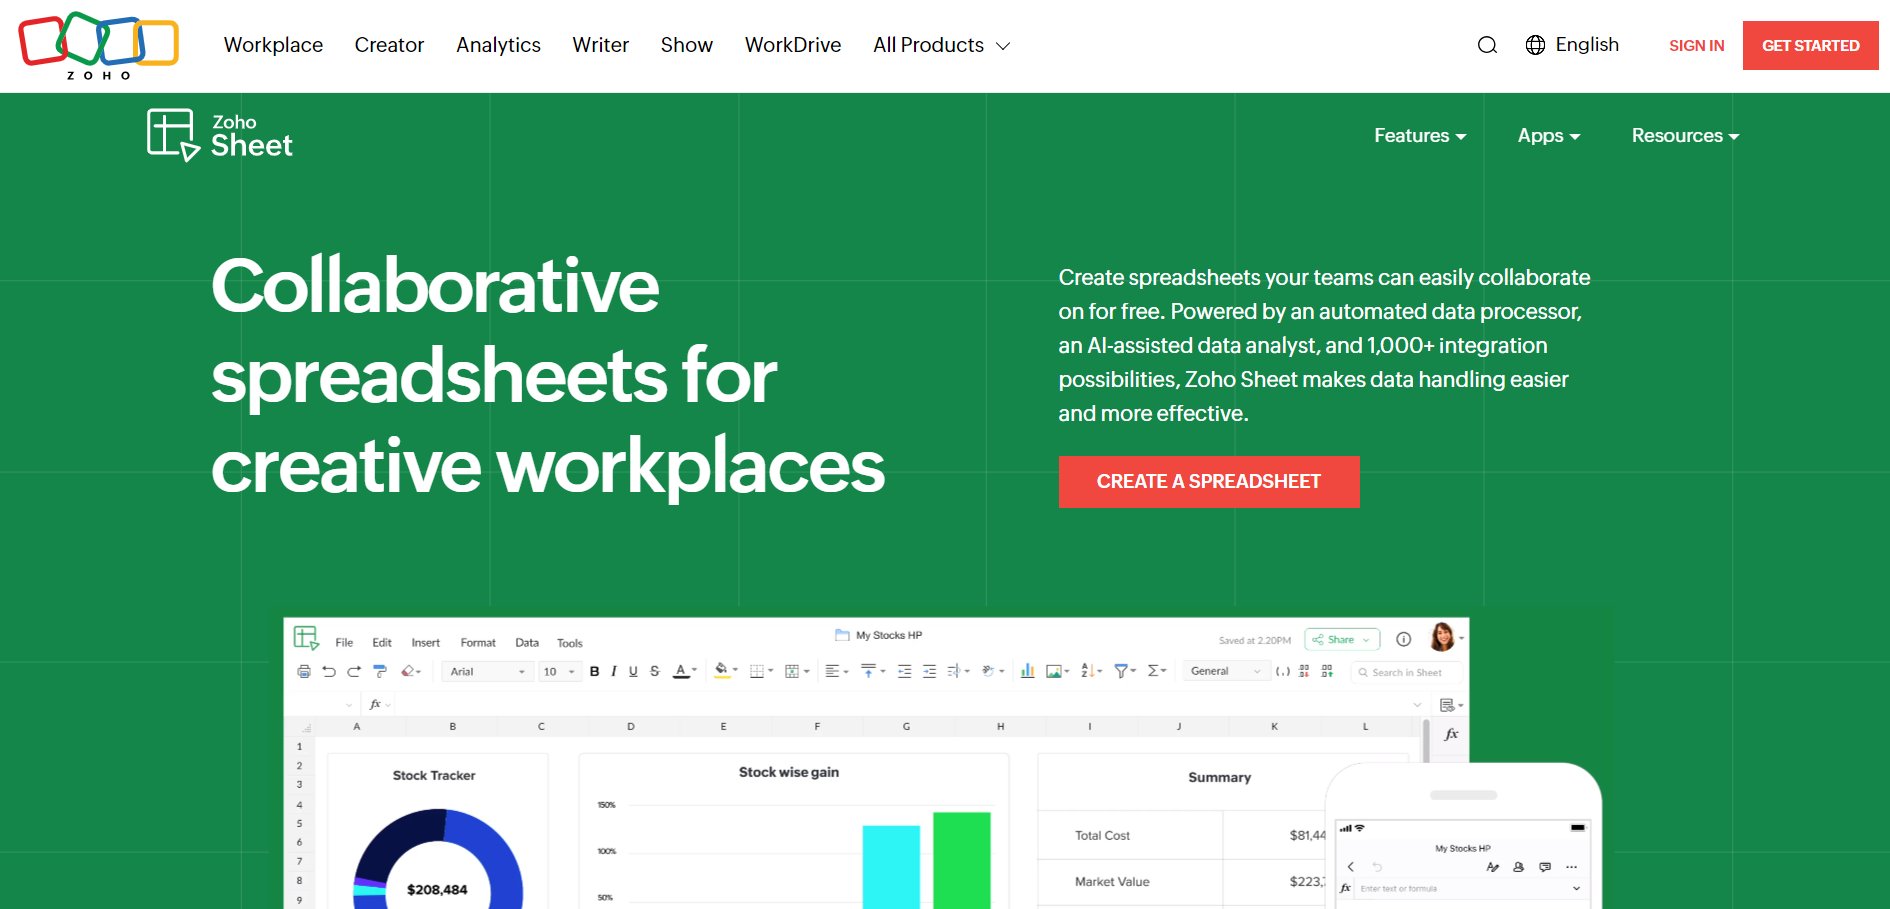 Zoho Sheet for Data Entry Software